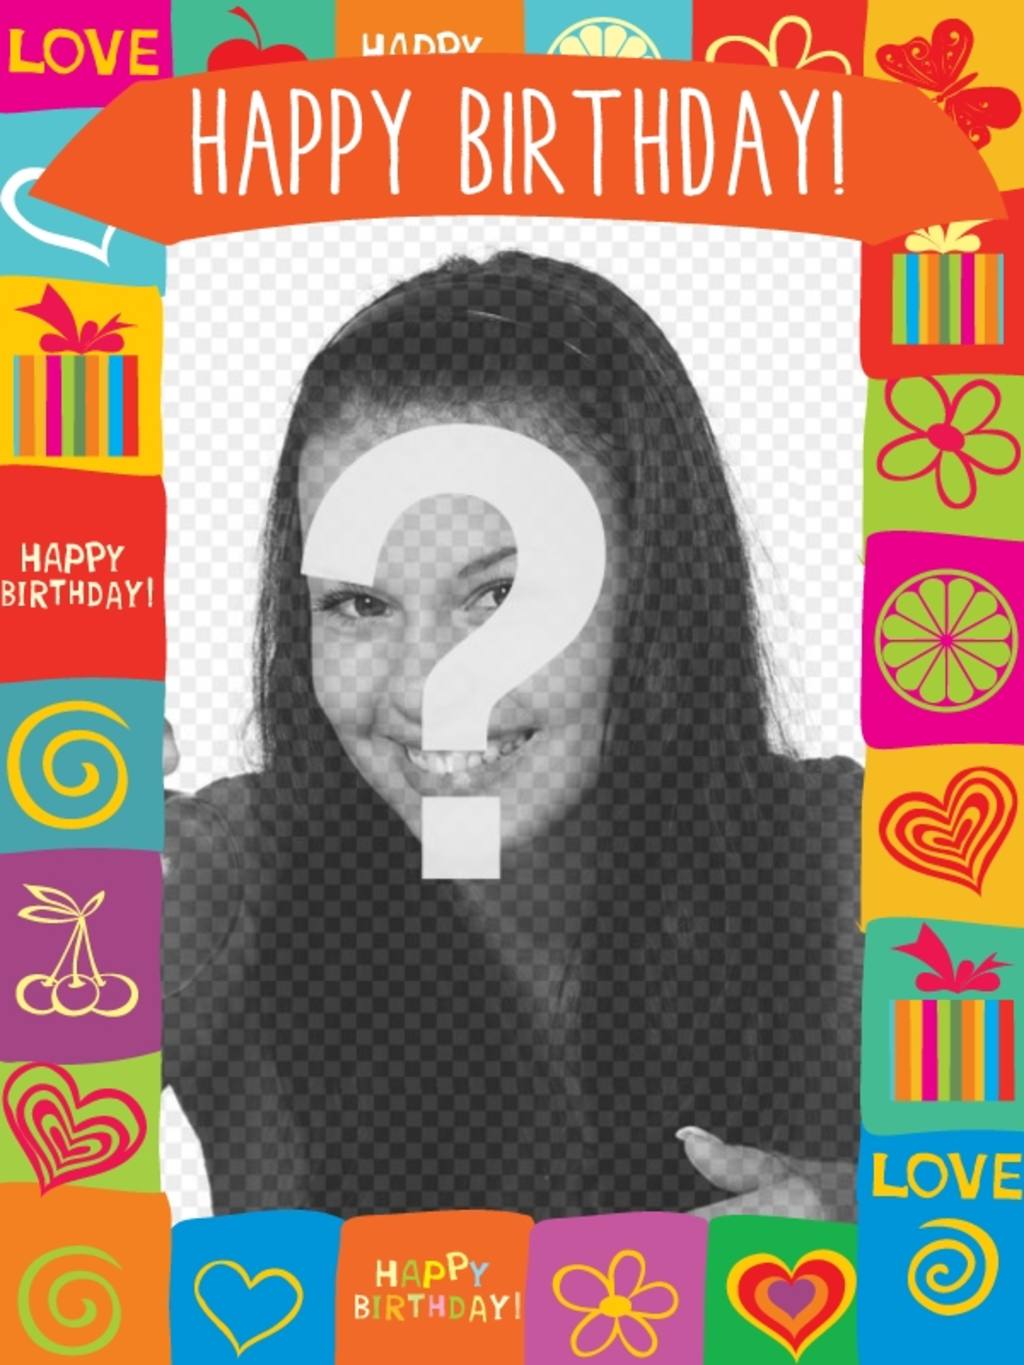 With this photo frame you can create a birthday card fun with colorful drawings, gifts, hearts, flowers and butterflies and also with the text Happy Birthday on..